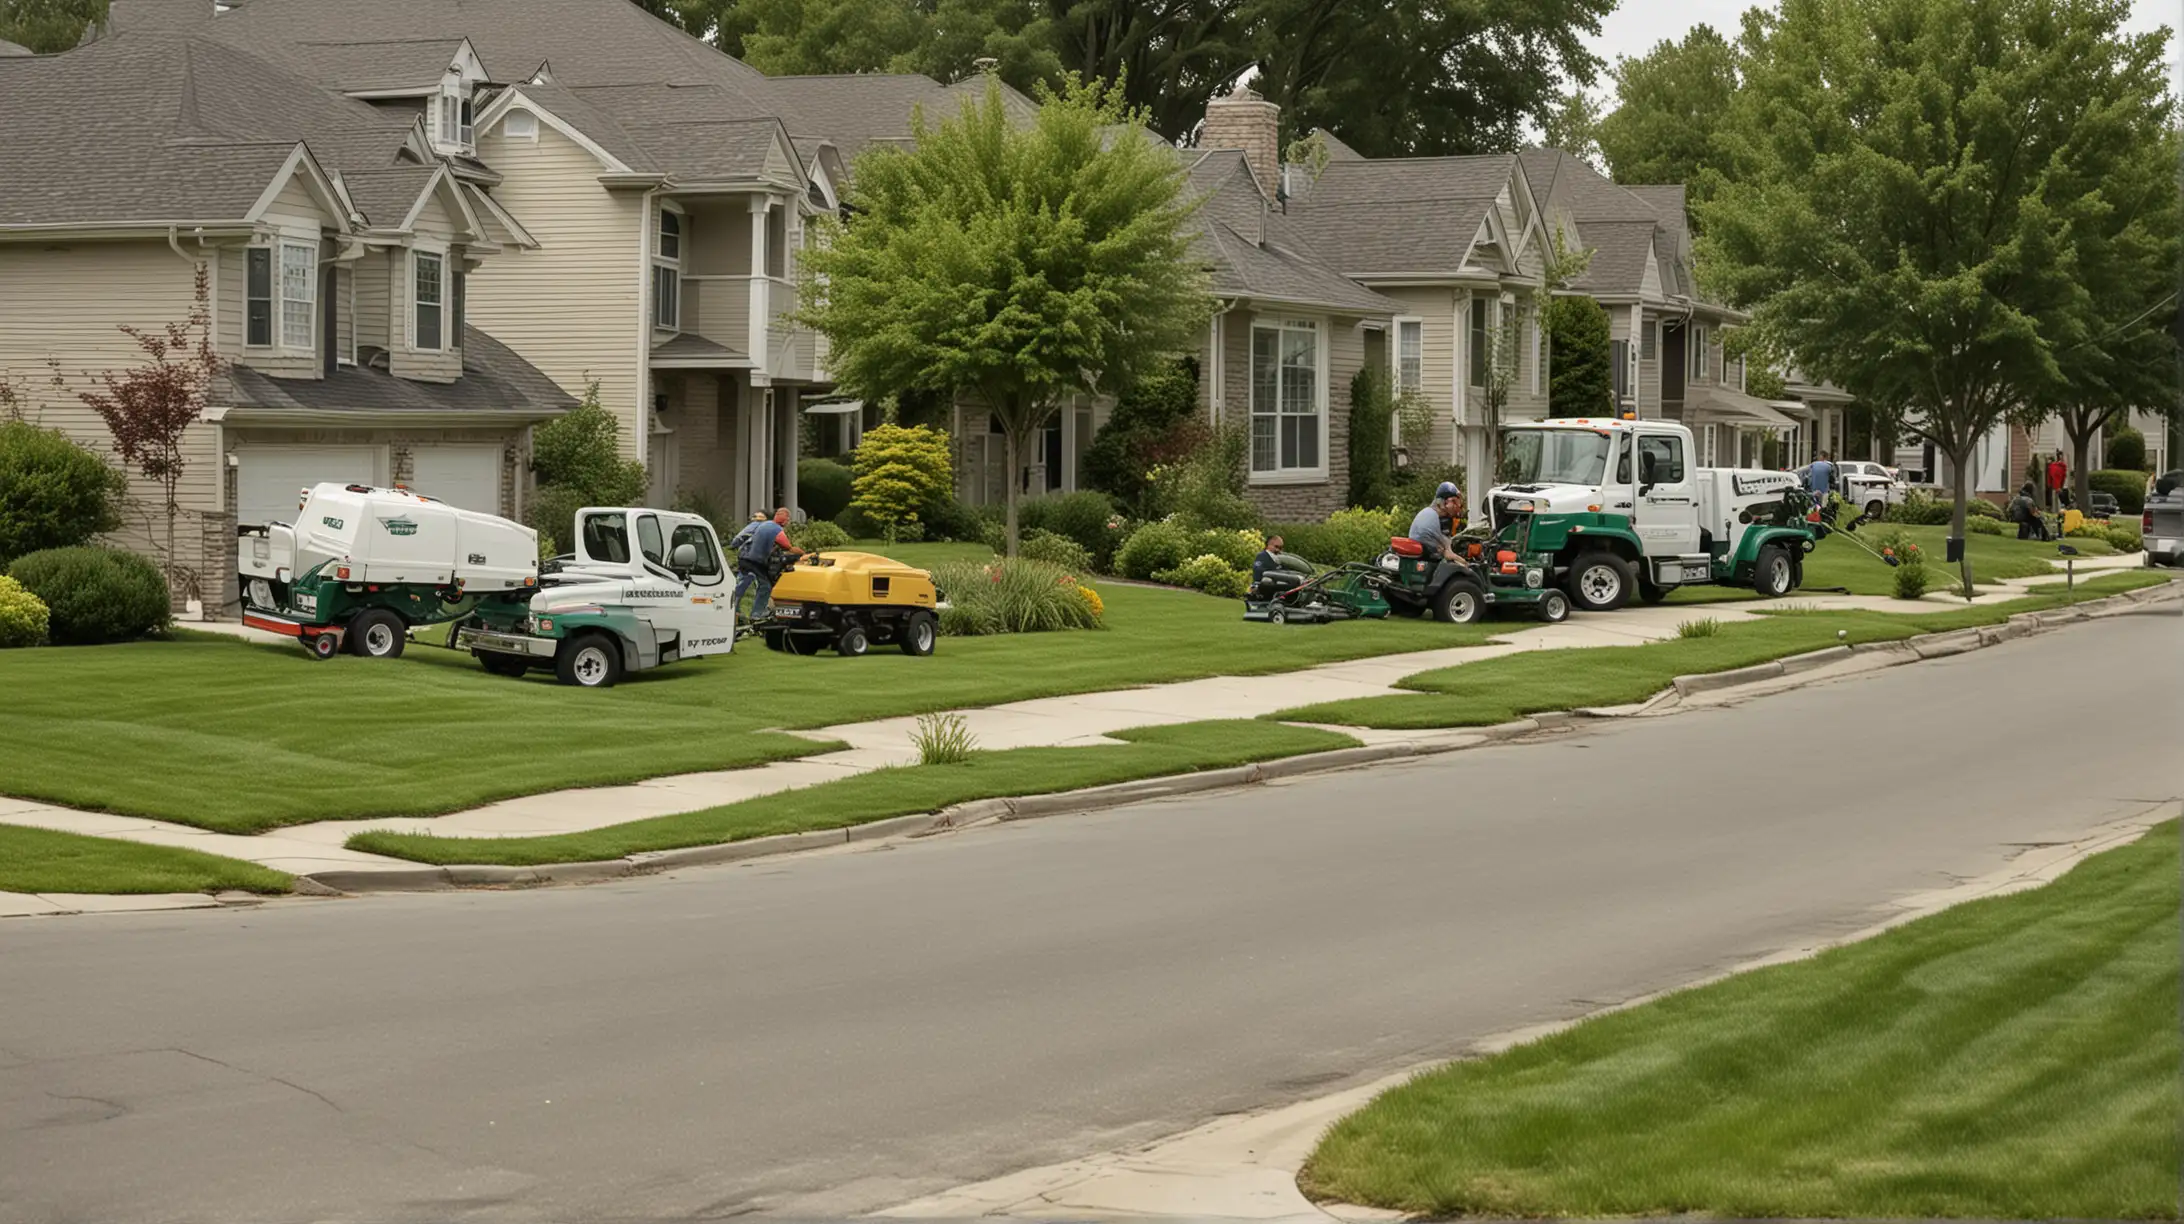 need an image of a landcape company mowing a neighborhood lawn with one person mowing and another weed whacking with the company trcuks parked along the road, sized at 1600x825 and under 5MB